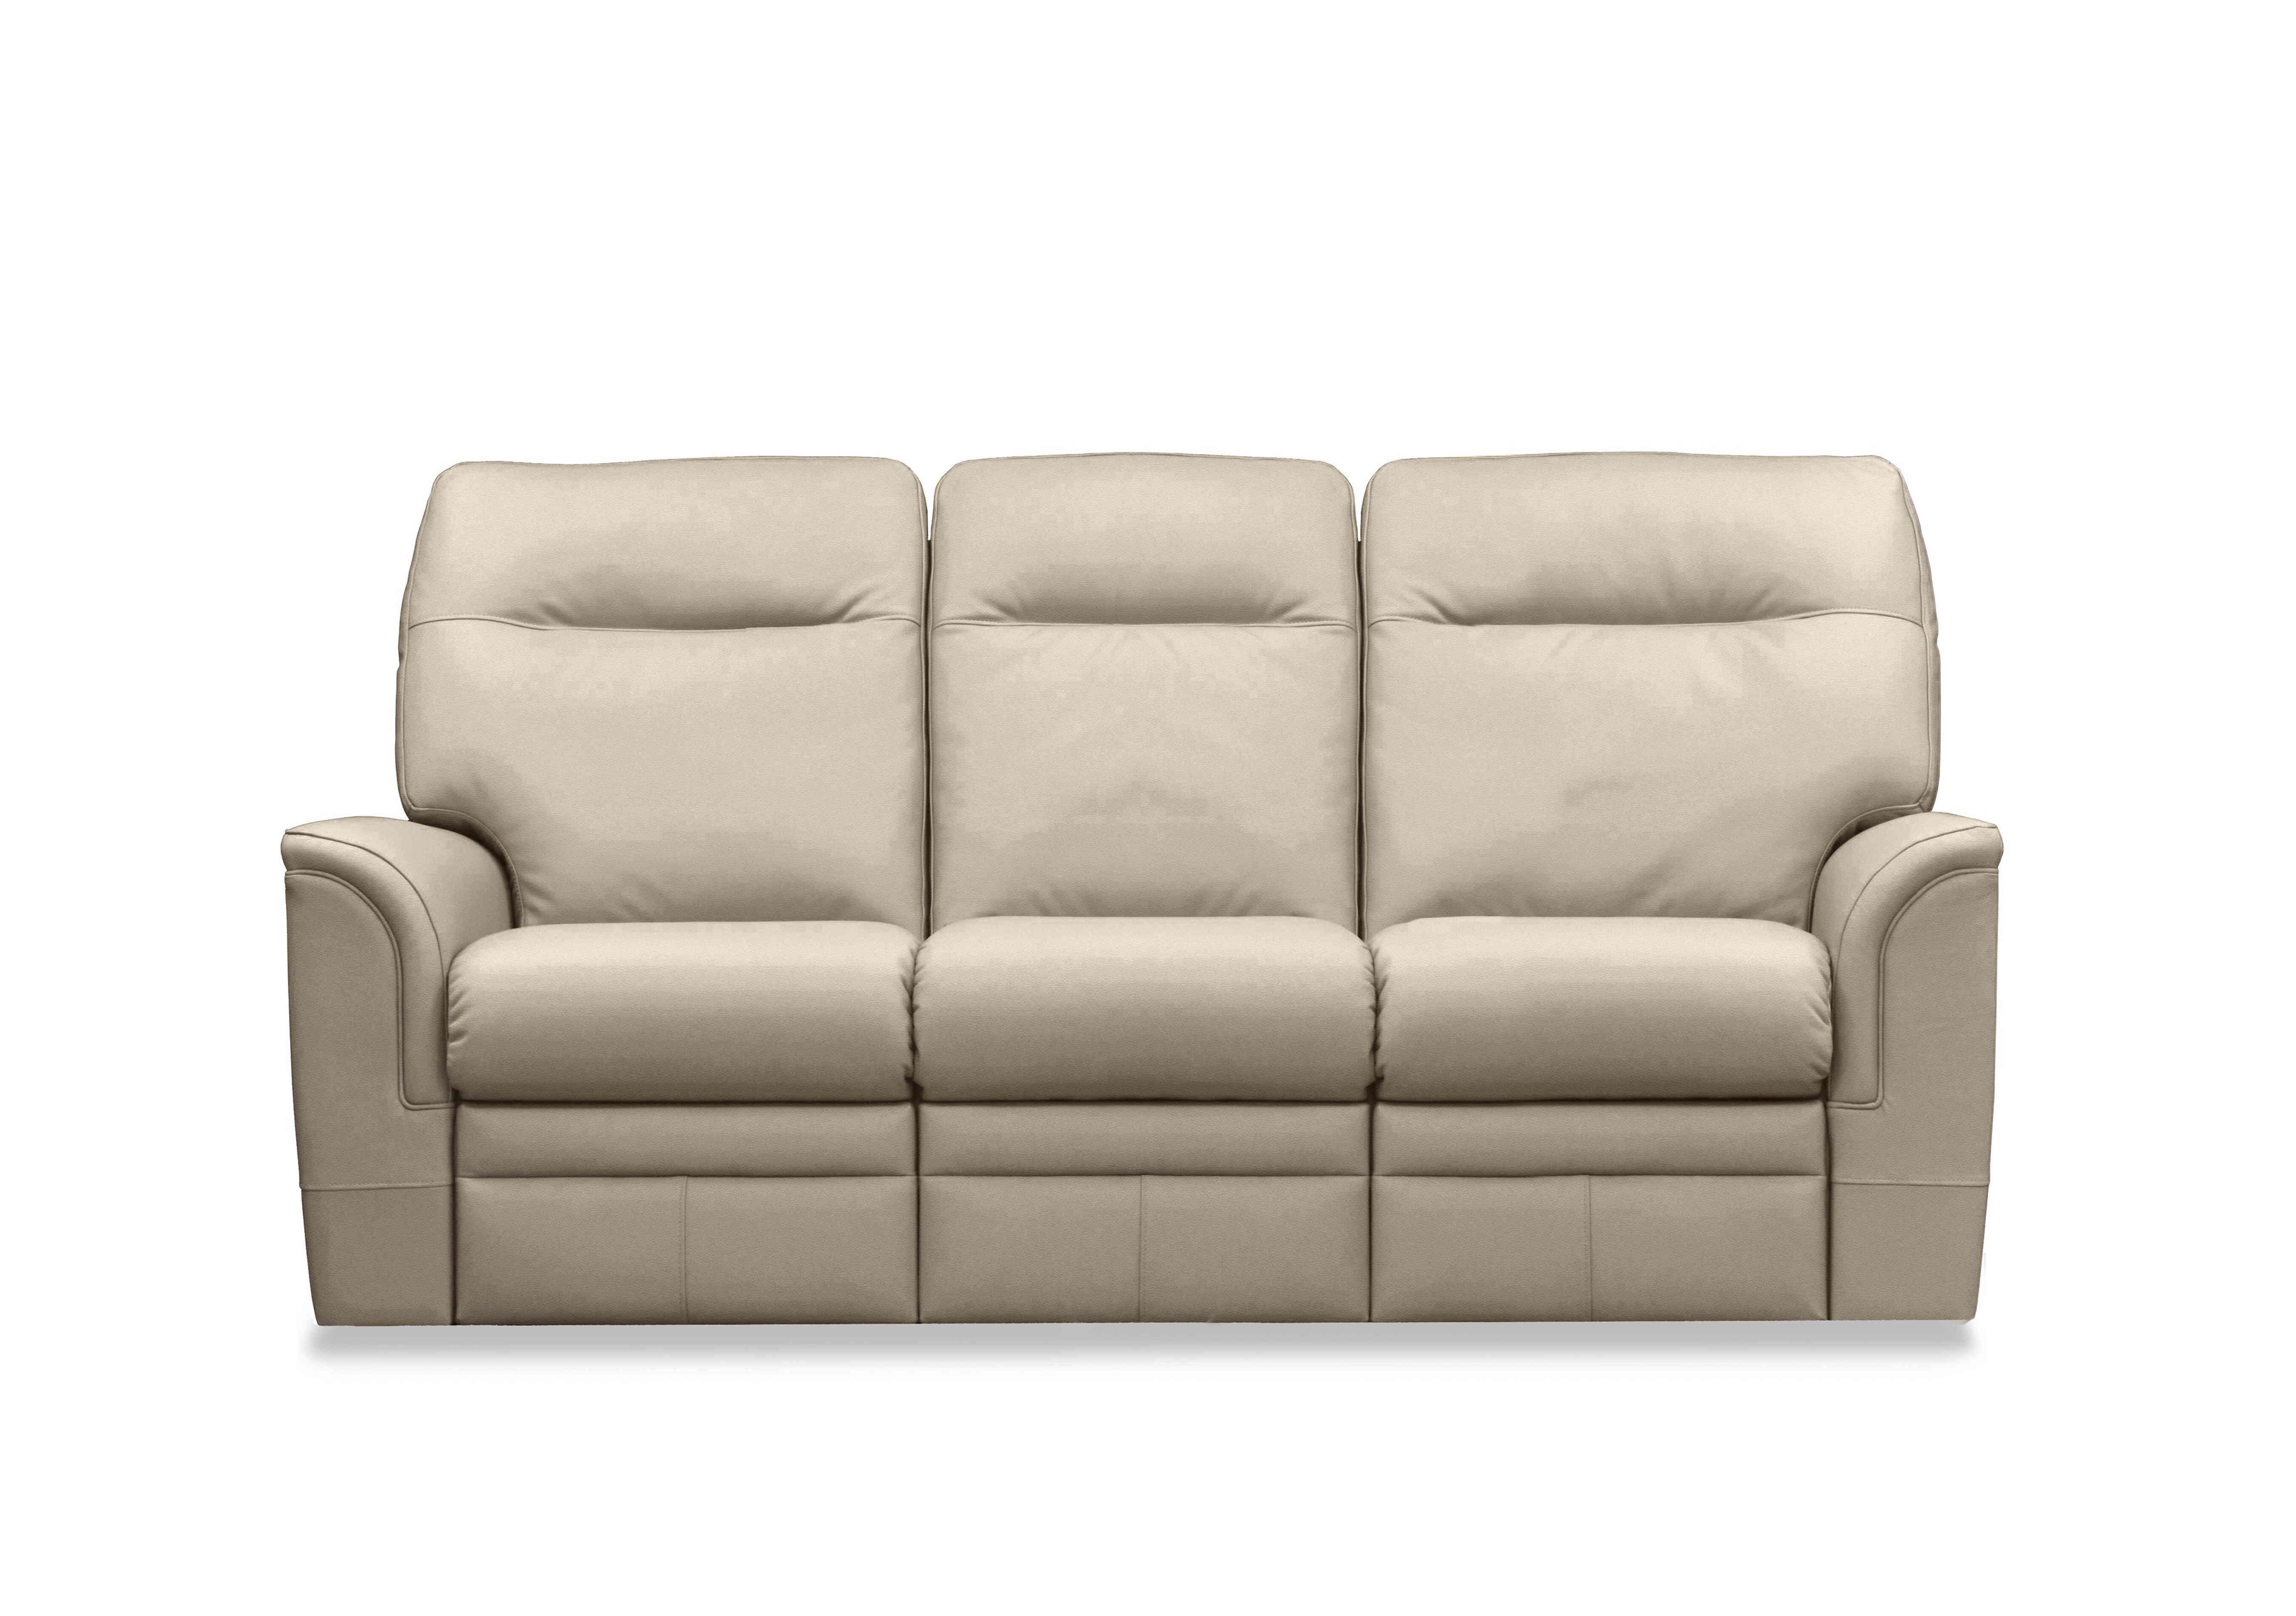 Hudson 23 Leather 3 Seater Sofa in Como Taupe 0053051-0019 on Furniture Village